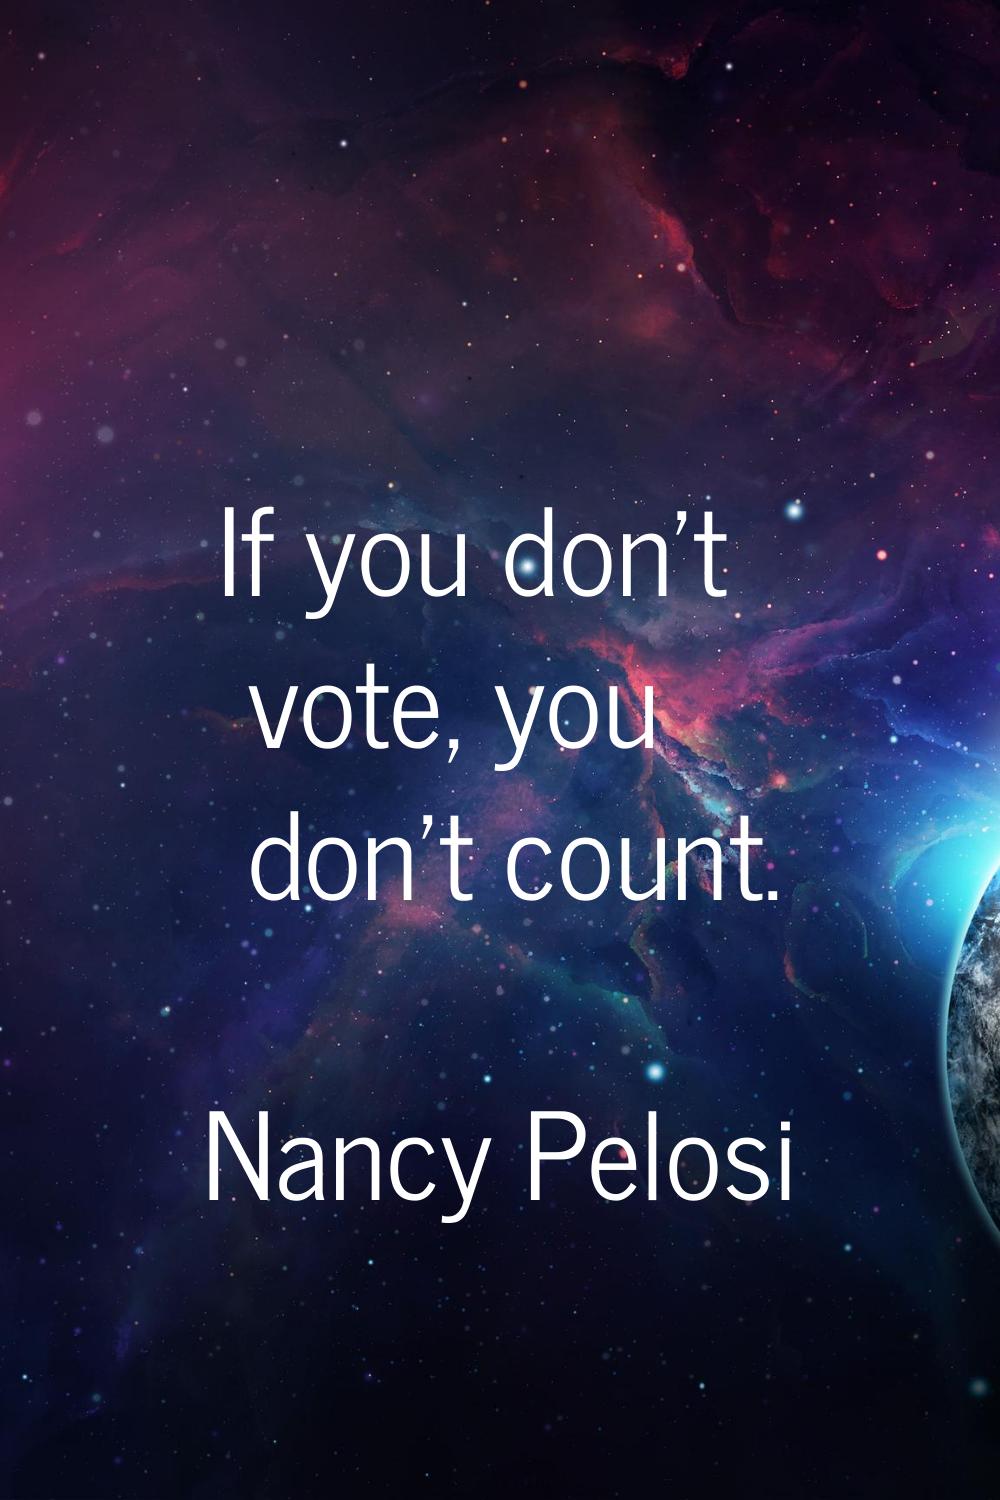 If you don't vote, you don't count.